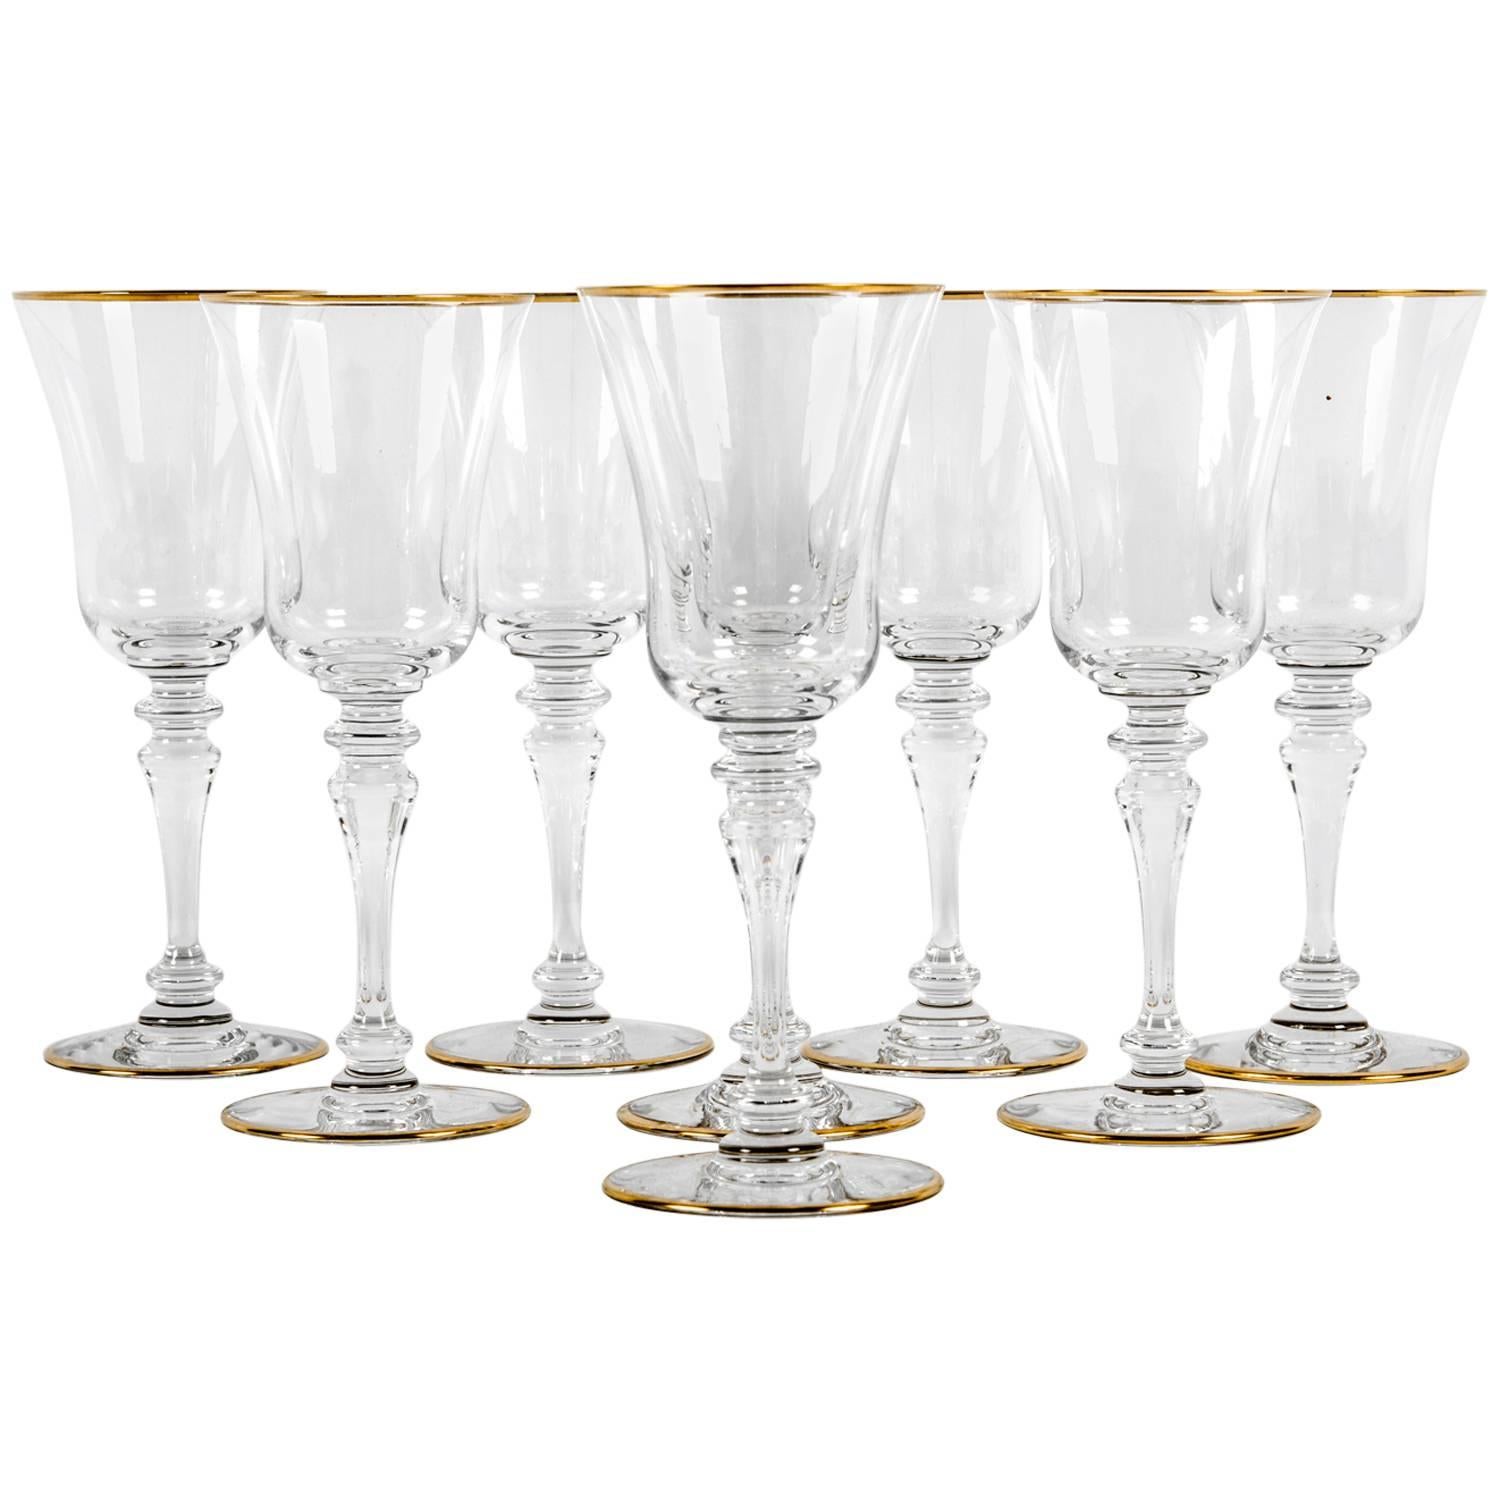 Set of Baccarat Crystal Glasses, France, 20th century, in the Vienne pattern